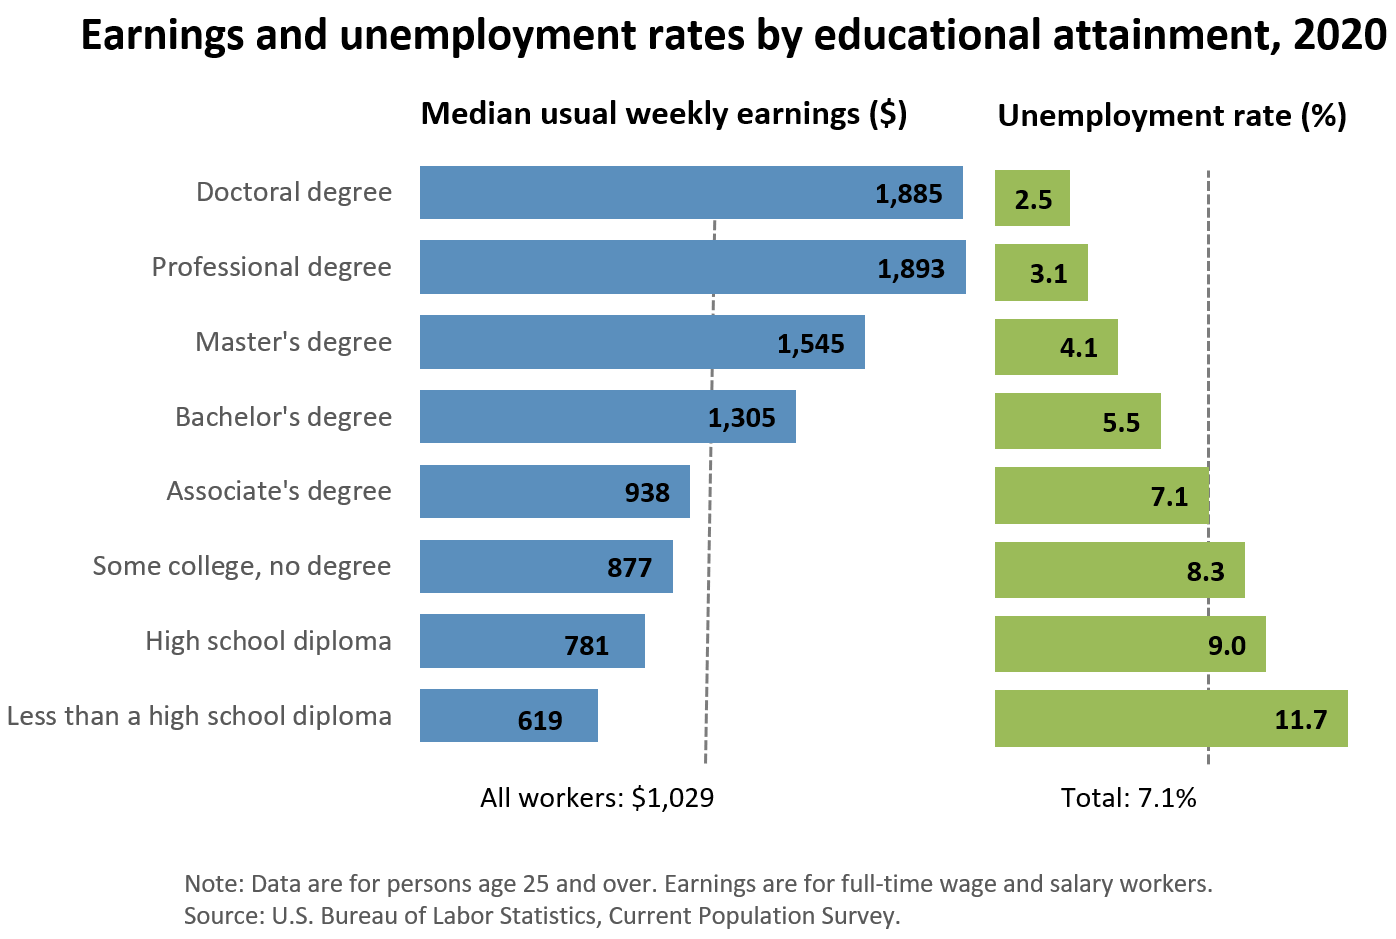 Education or Experience - Earning and unemployment rates by educational attainment -2020